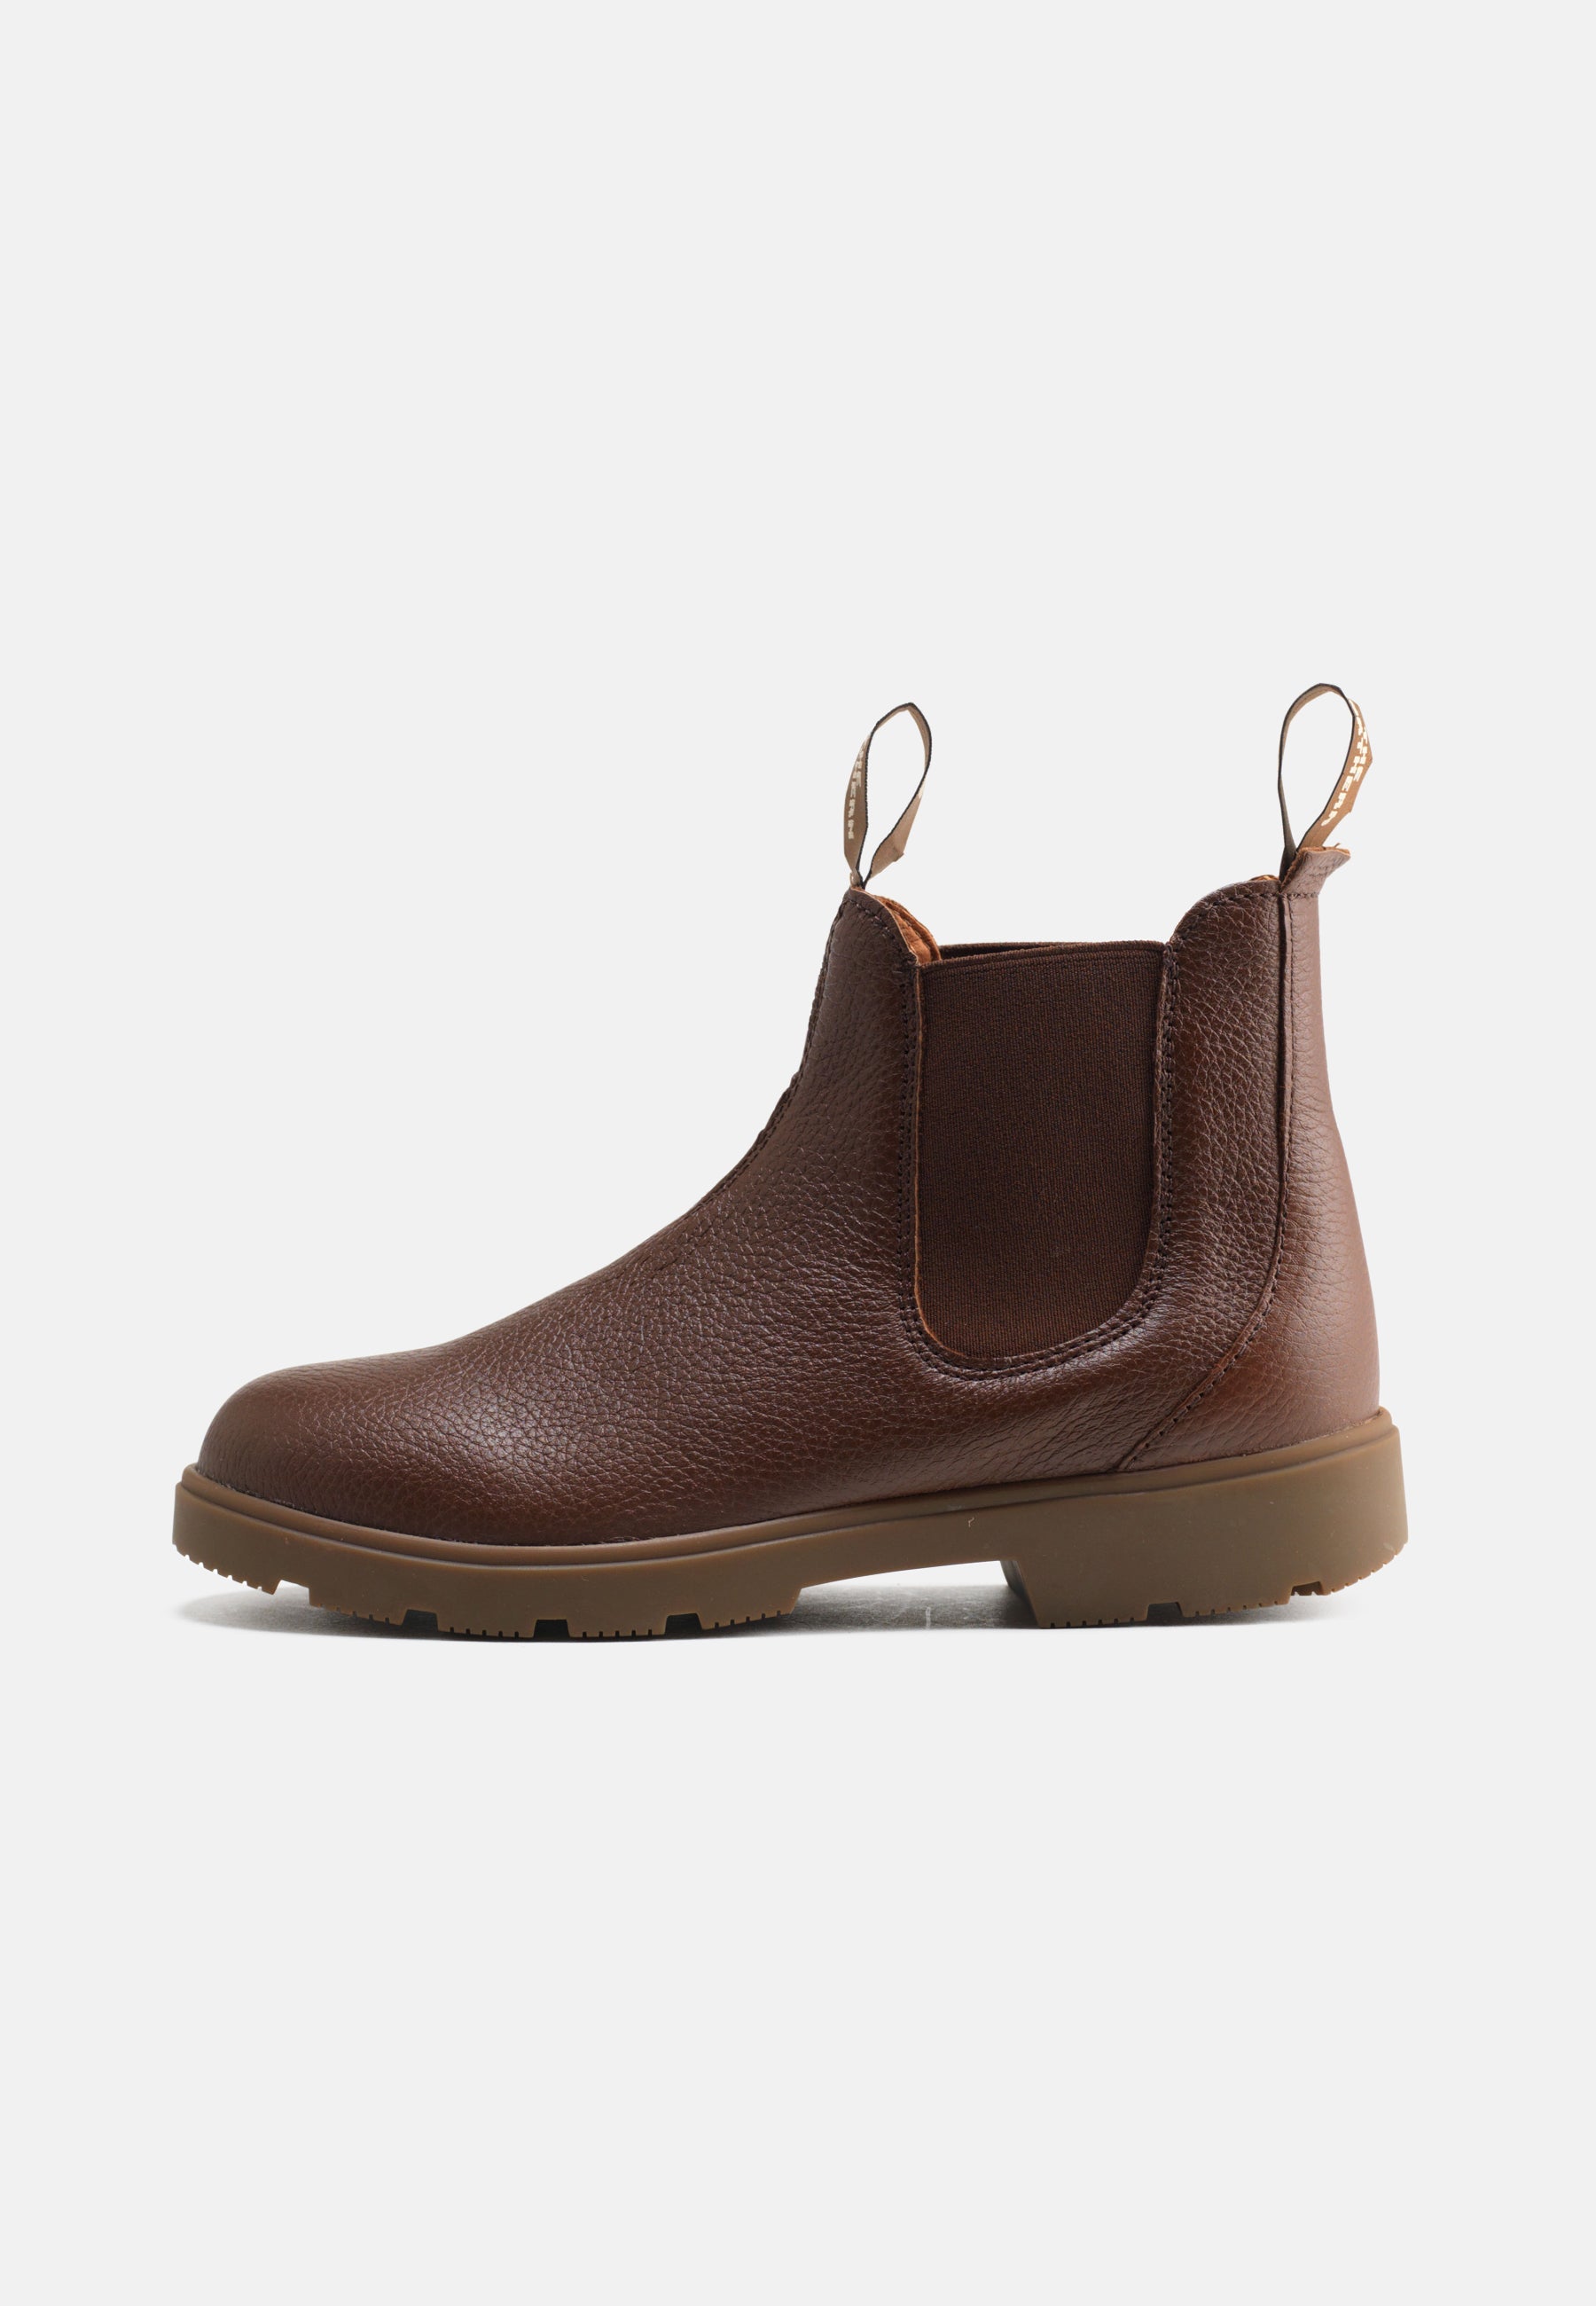 The Northern Gorm Støvle Elk Pull Up Leather Boot 144 Mahogany